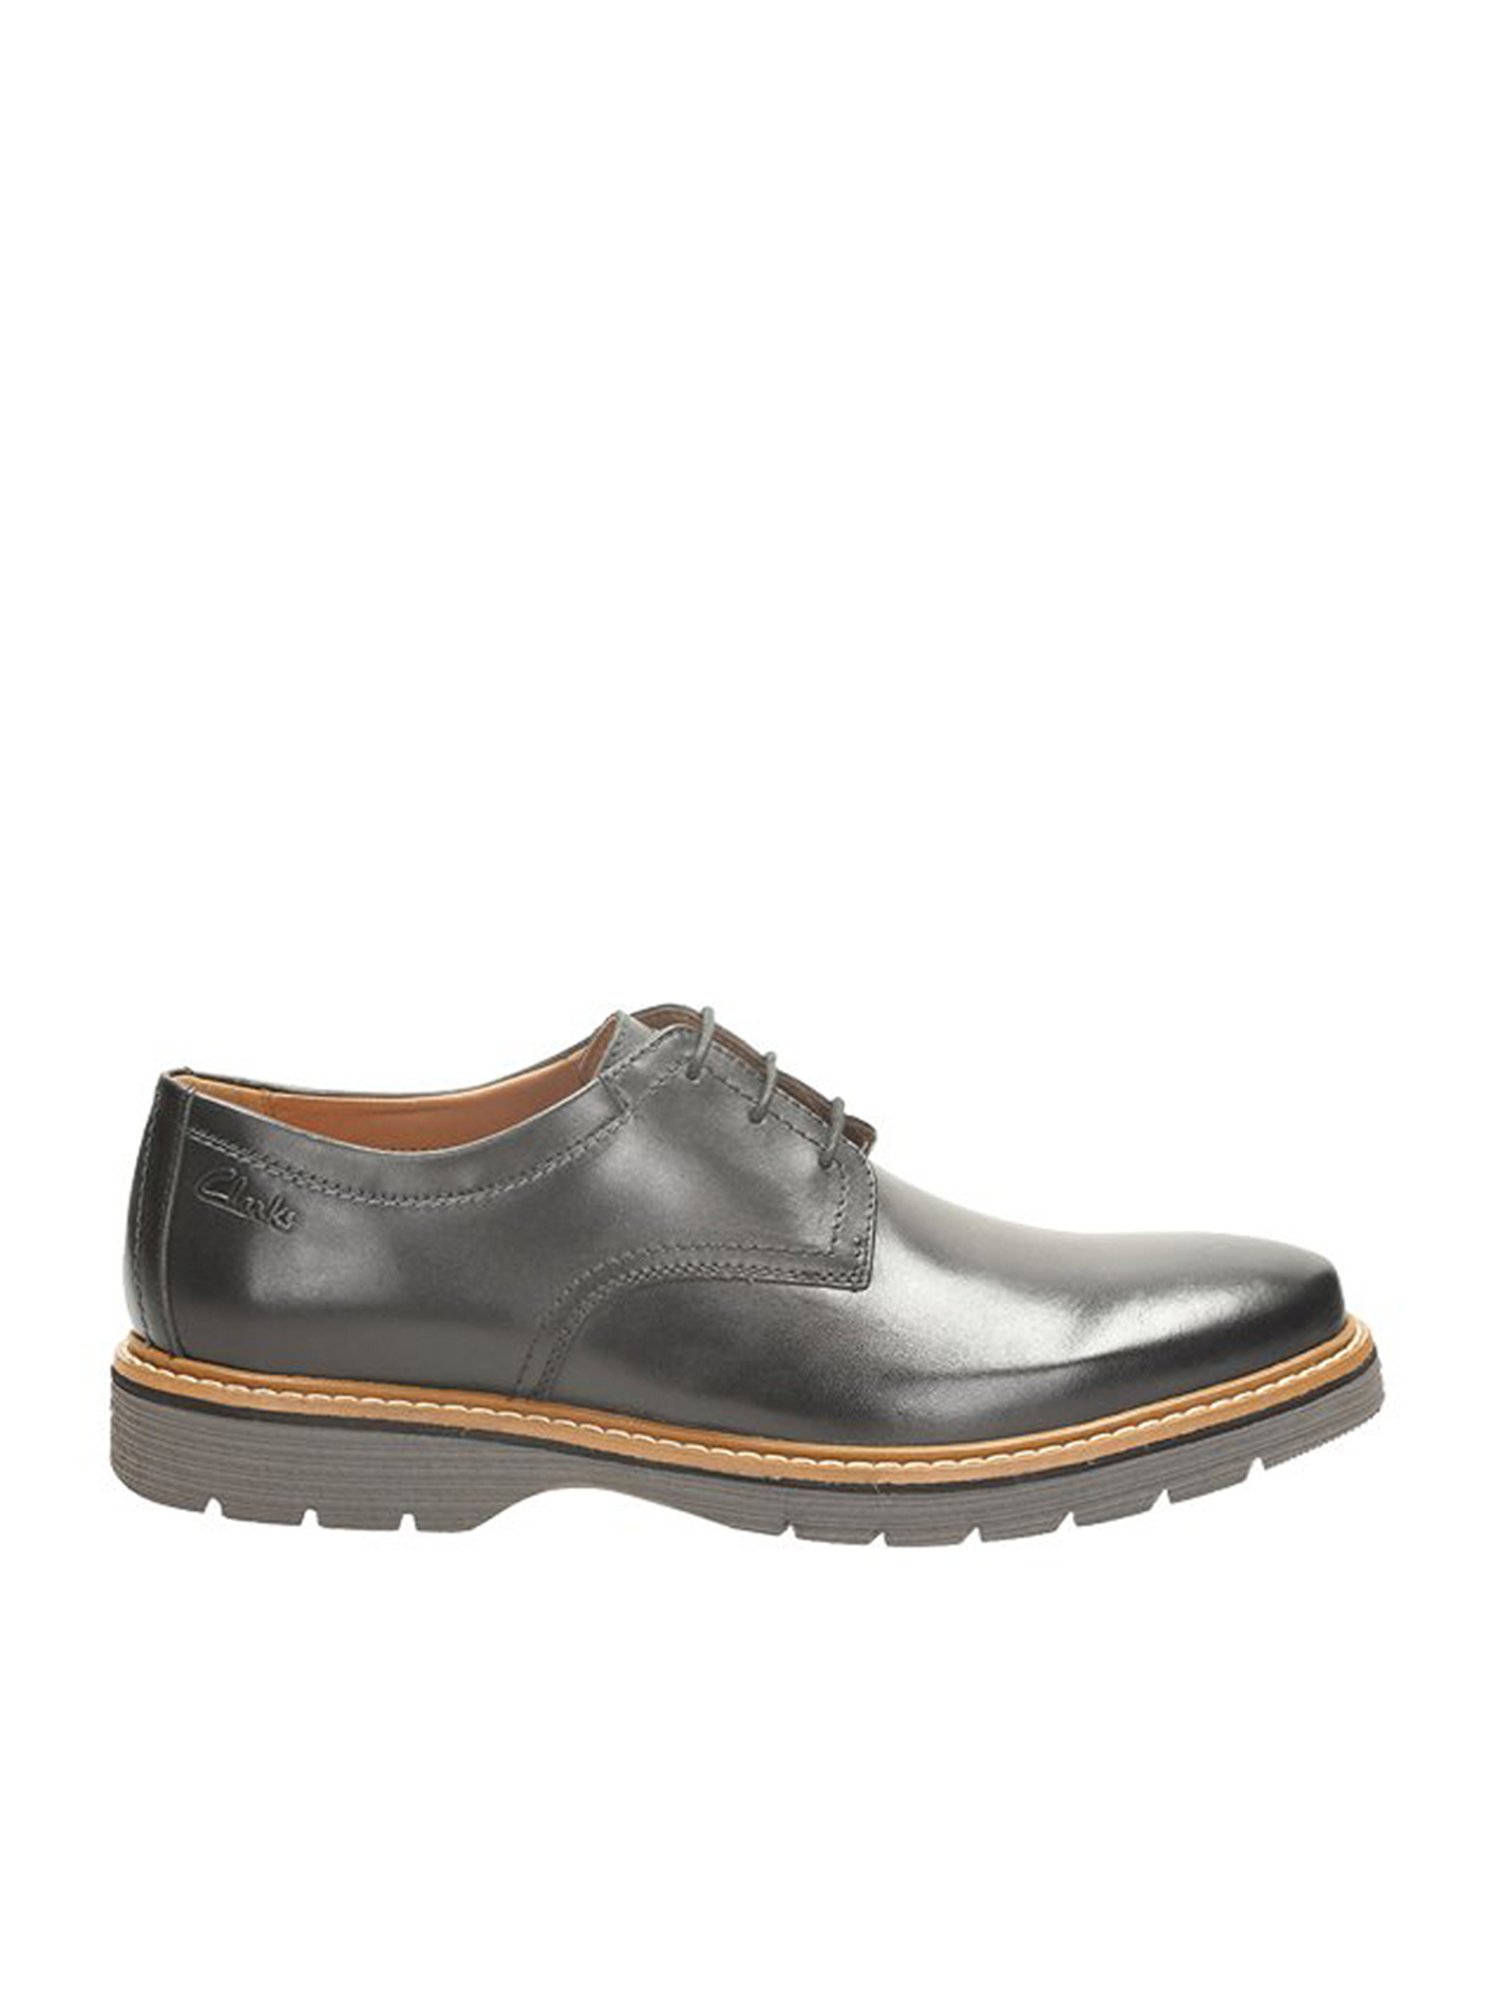 Buy Newkirk Plain Black Derby Shoes for Men at Best Price @ Tata CLiQ